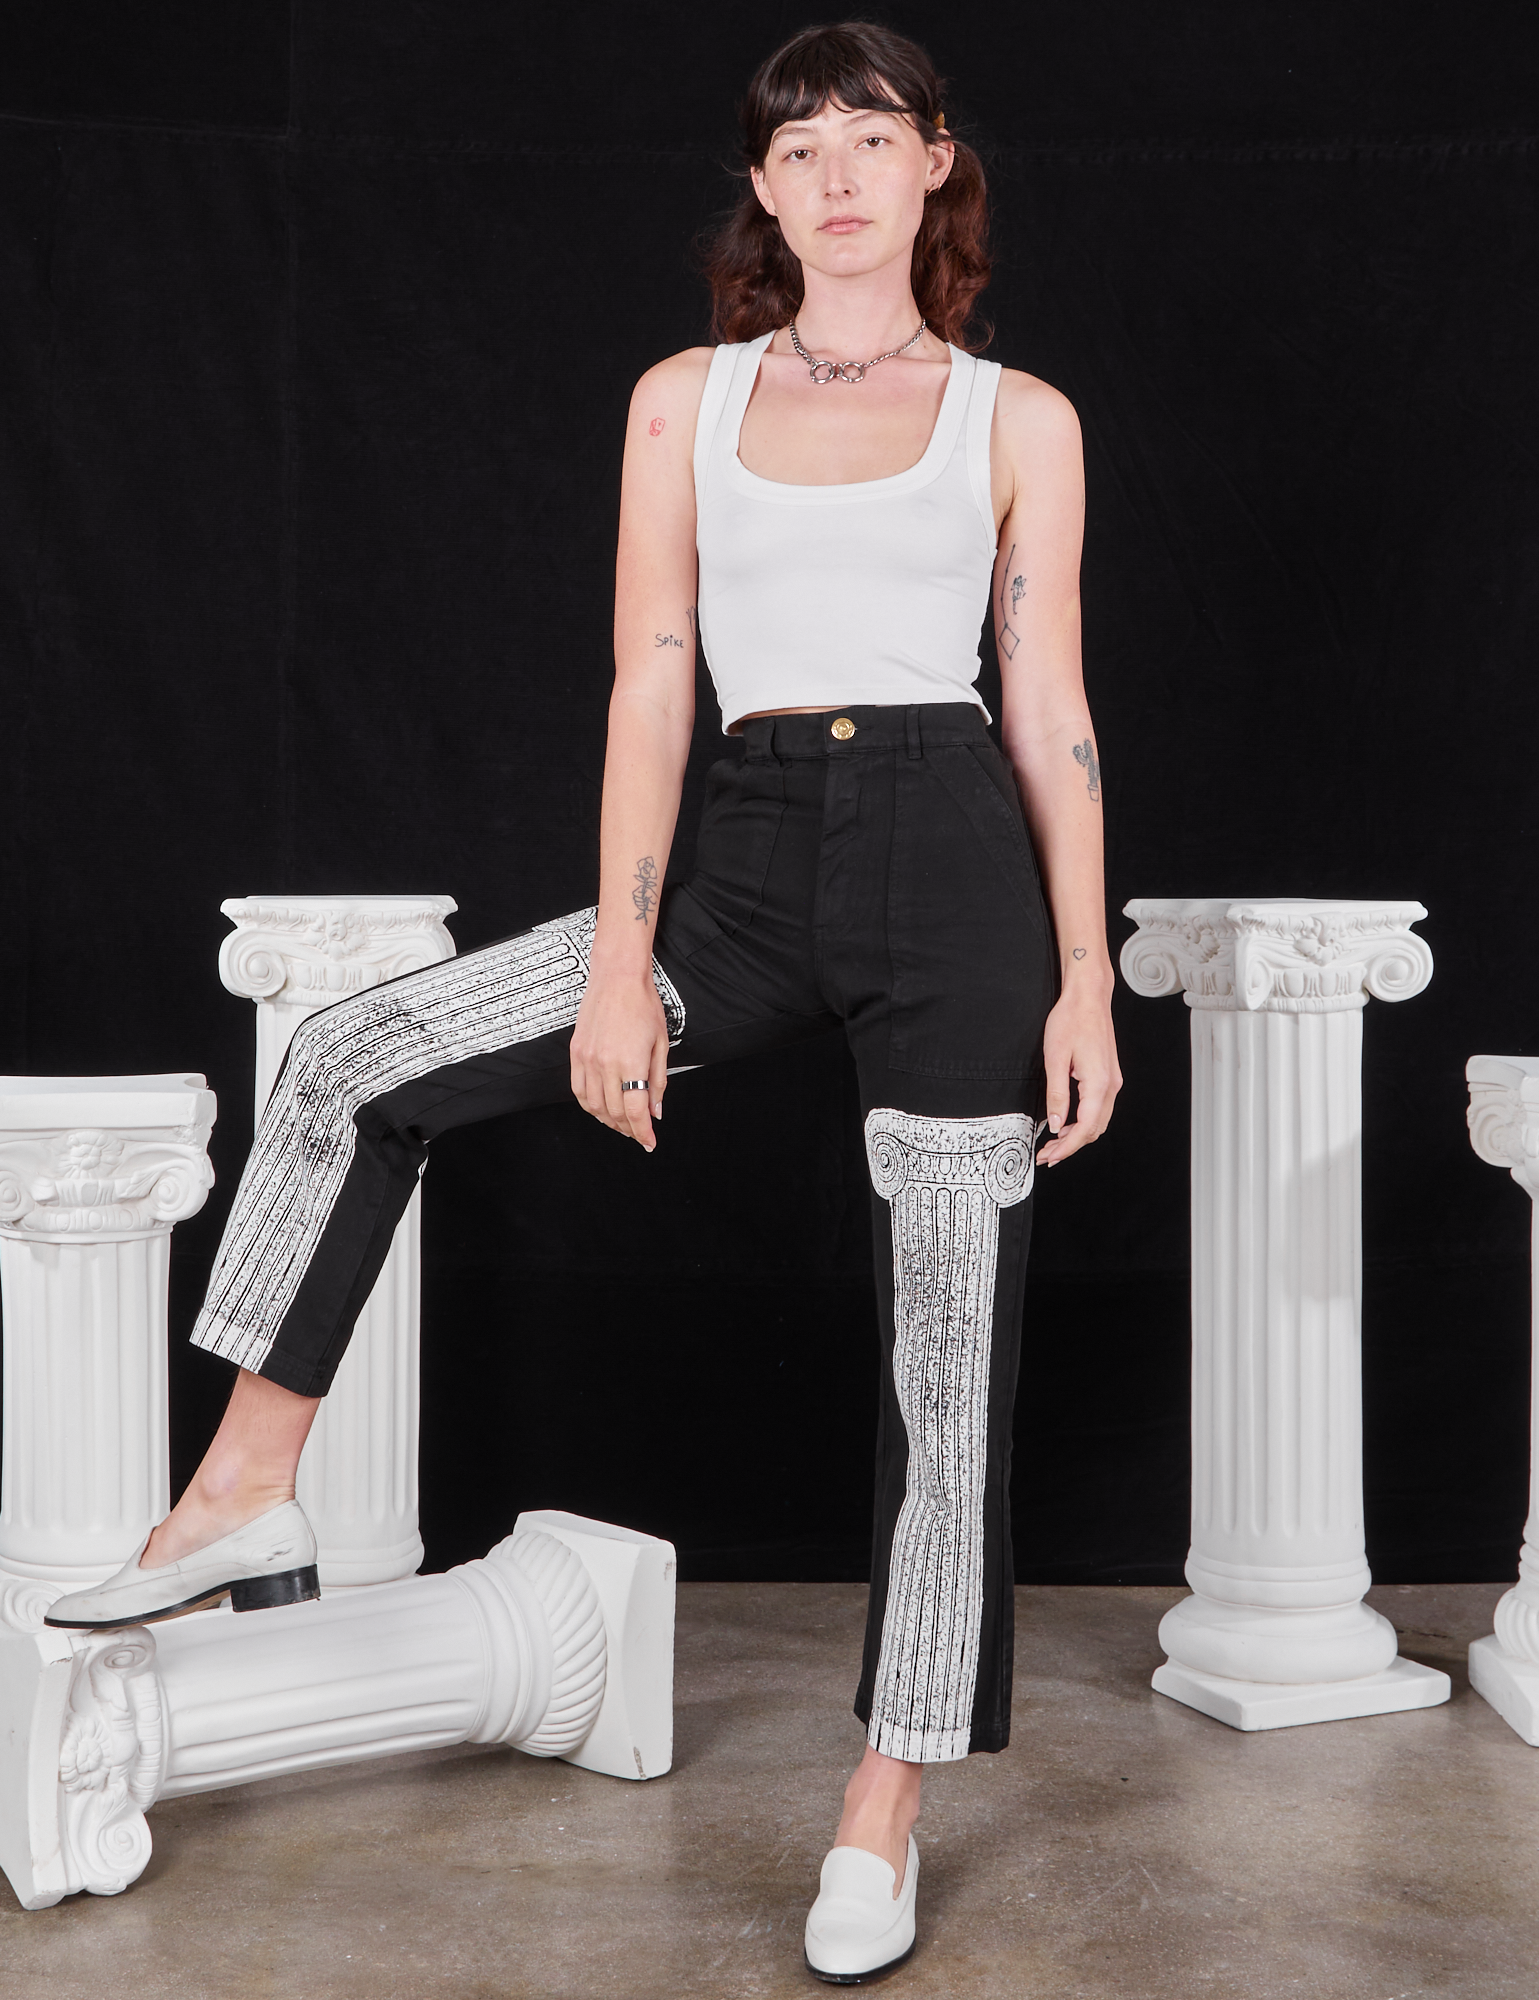 Alex is wearing Column Work Pants in Basic Black and vintage off-white Cropped Tank Top